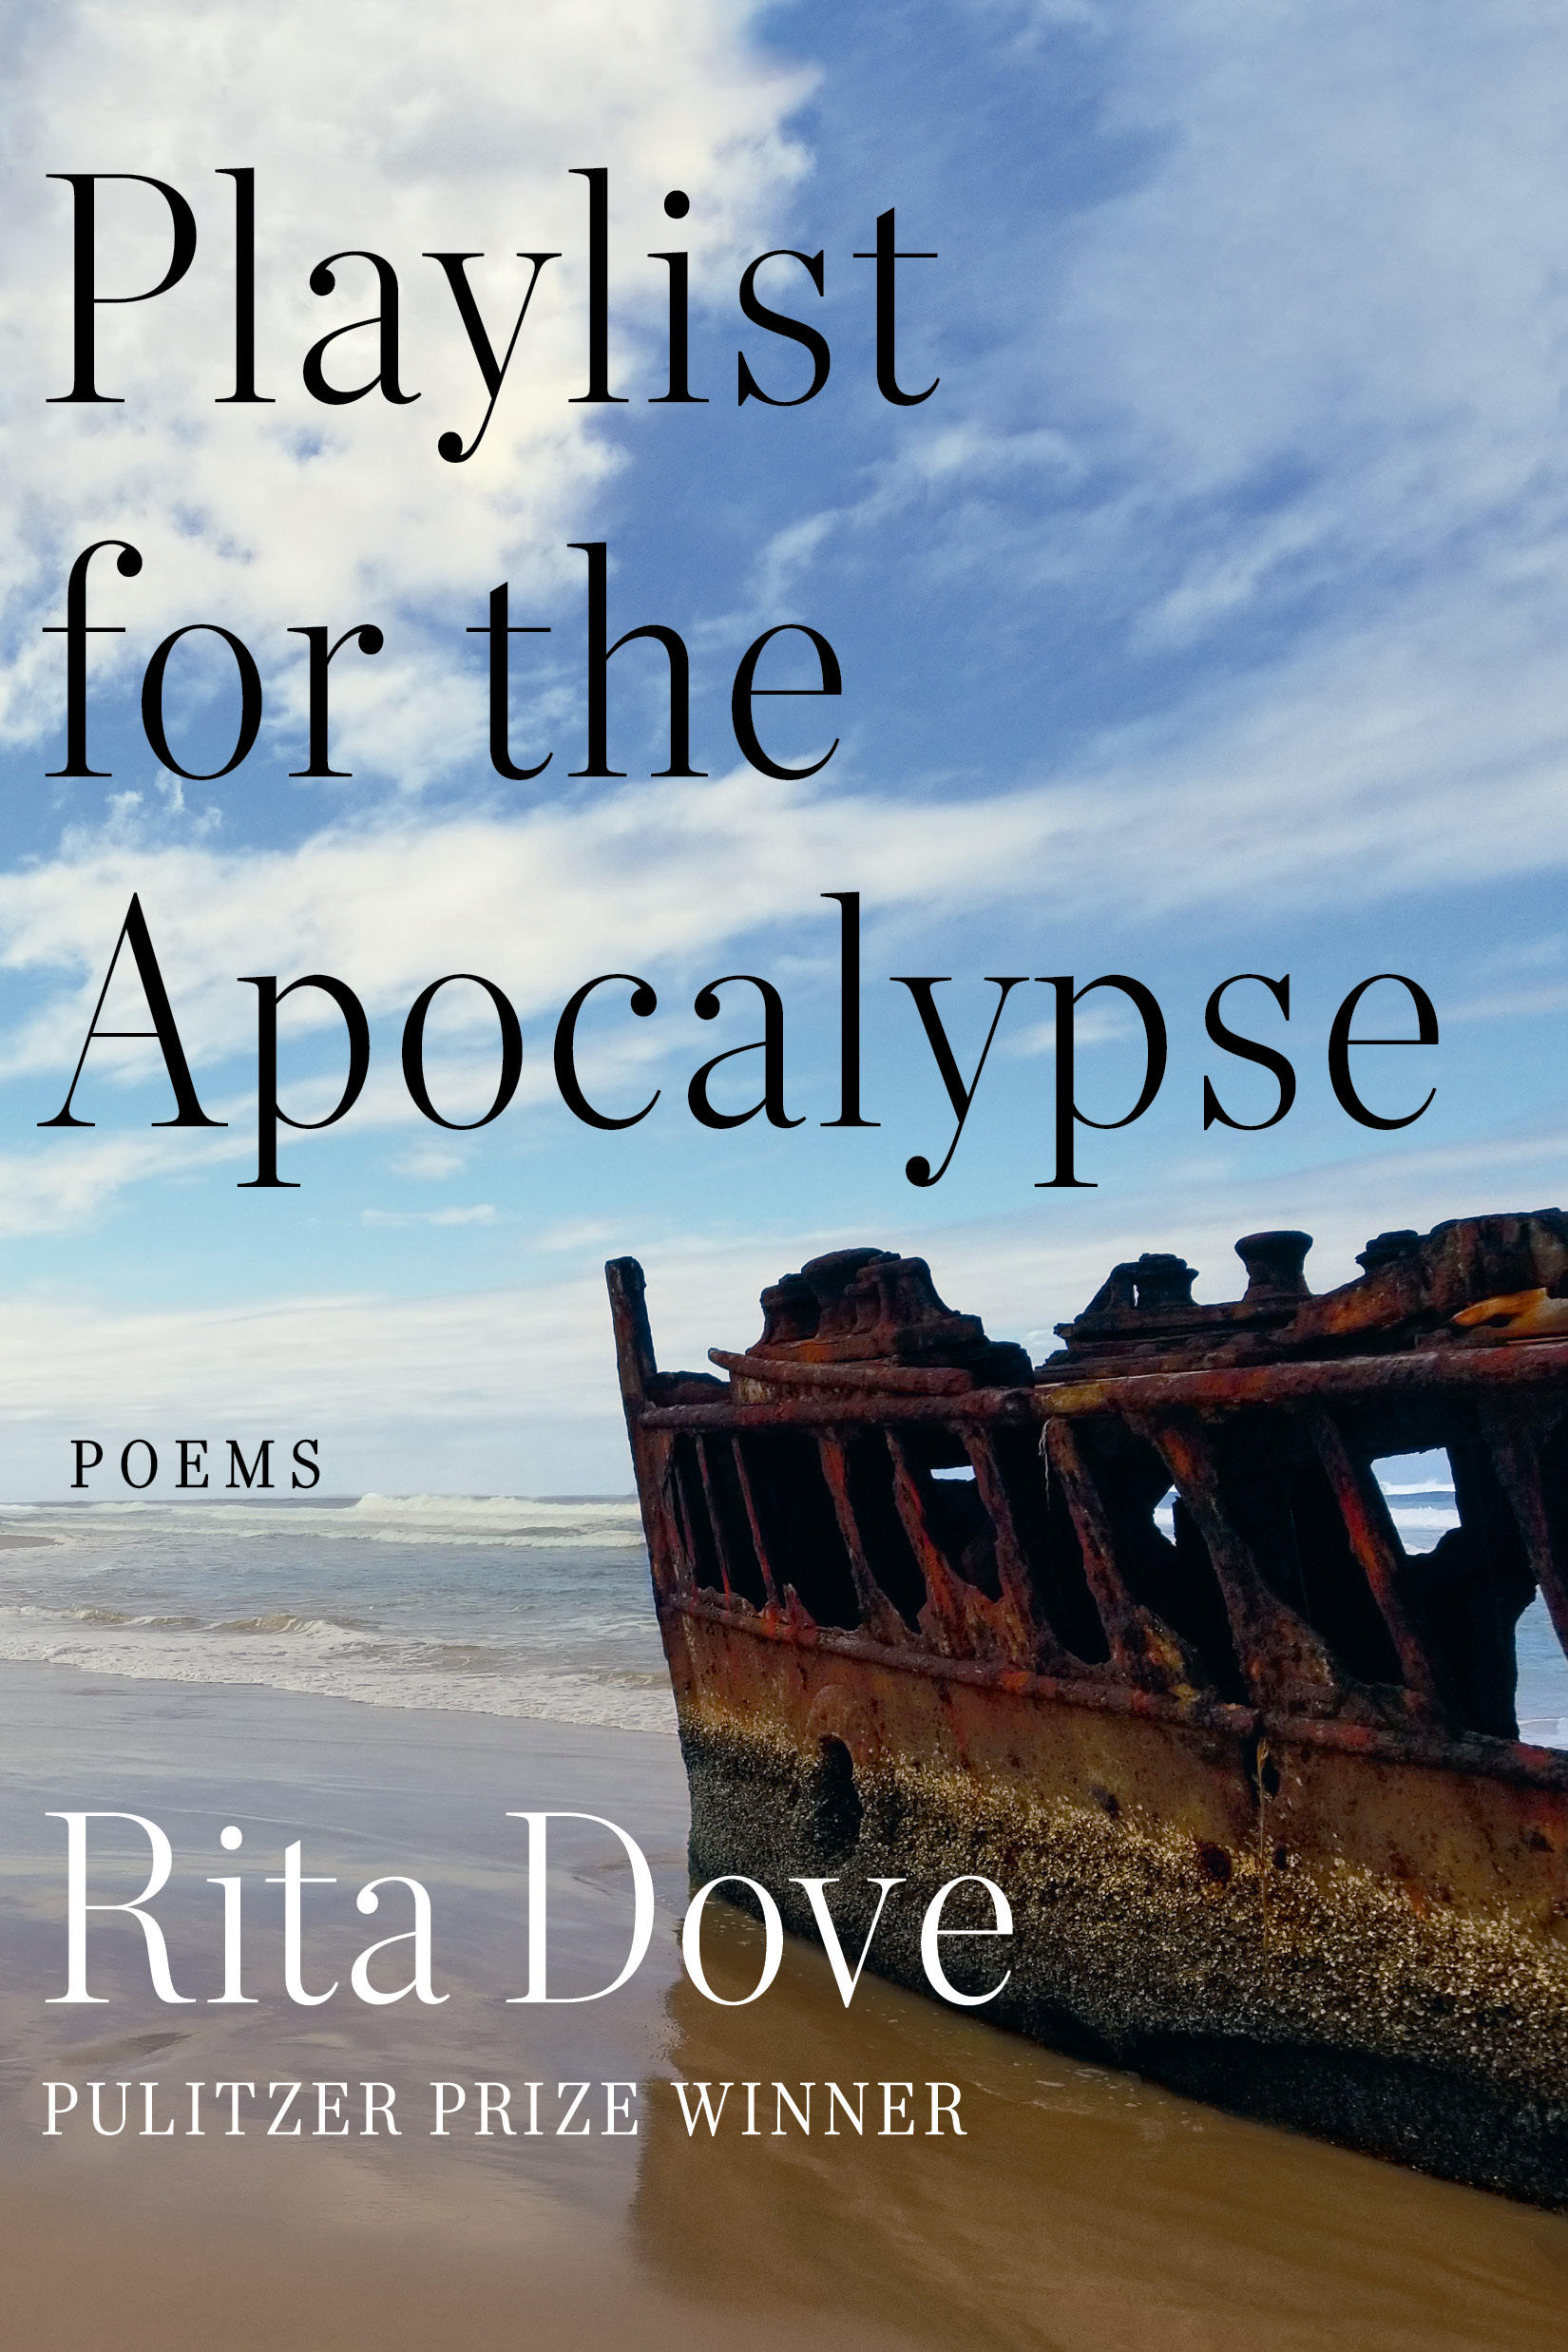 Book cover for Playlist for the Apocalypse, depicting ruins of a ship on a beach